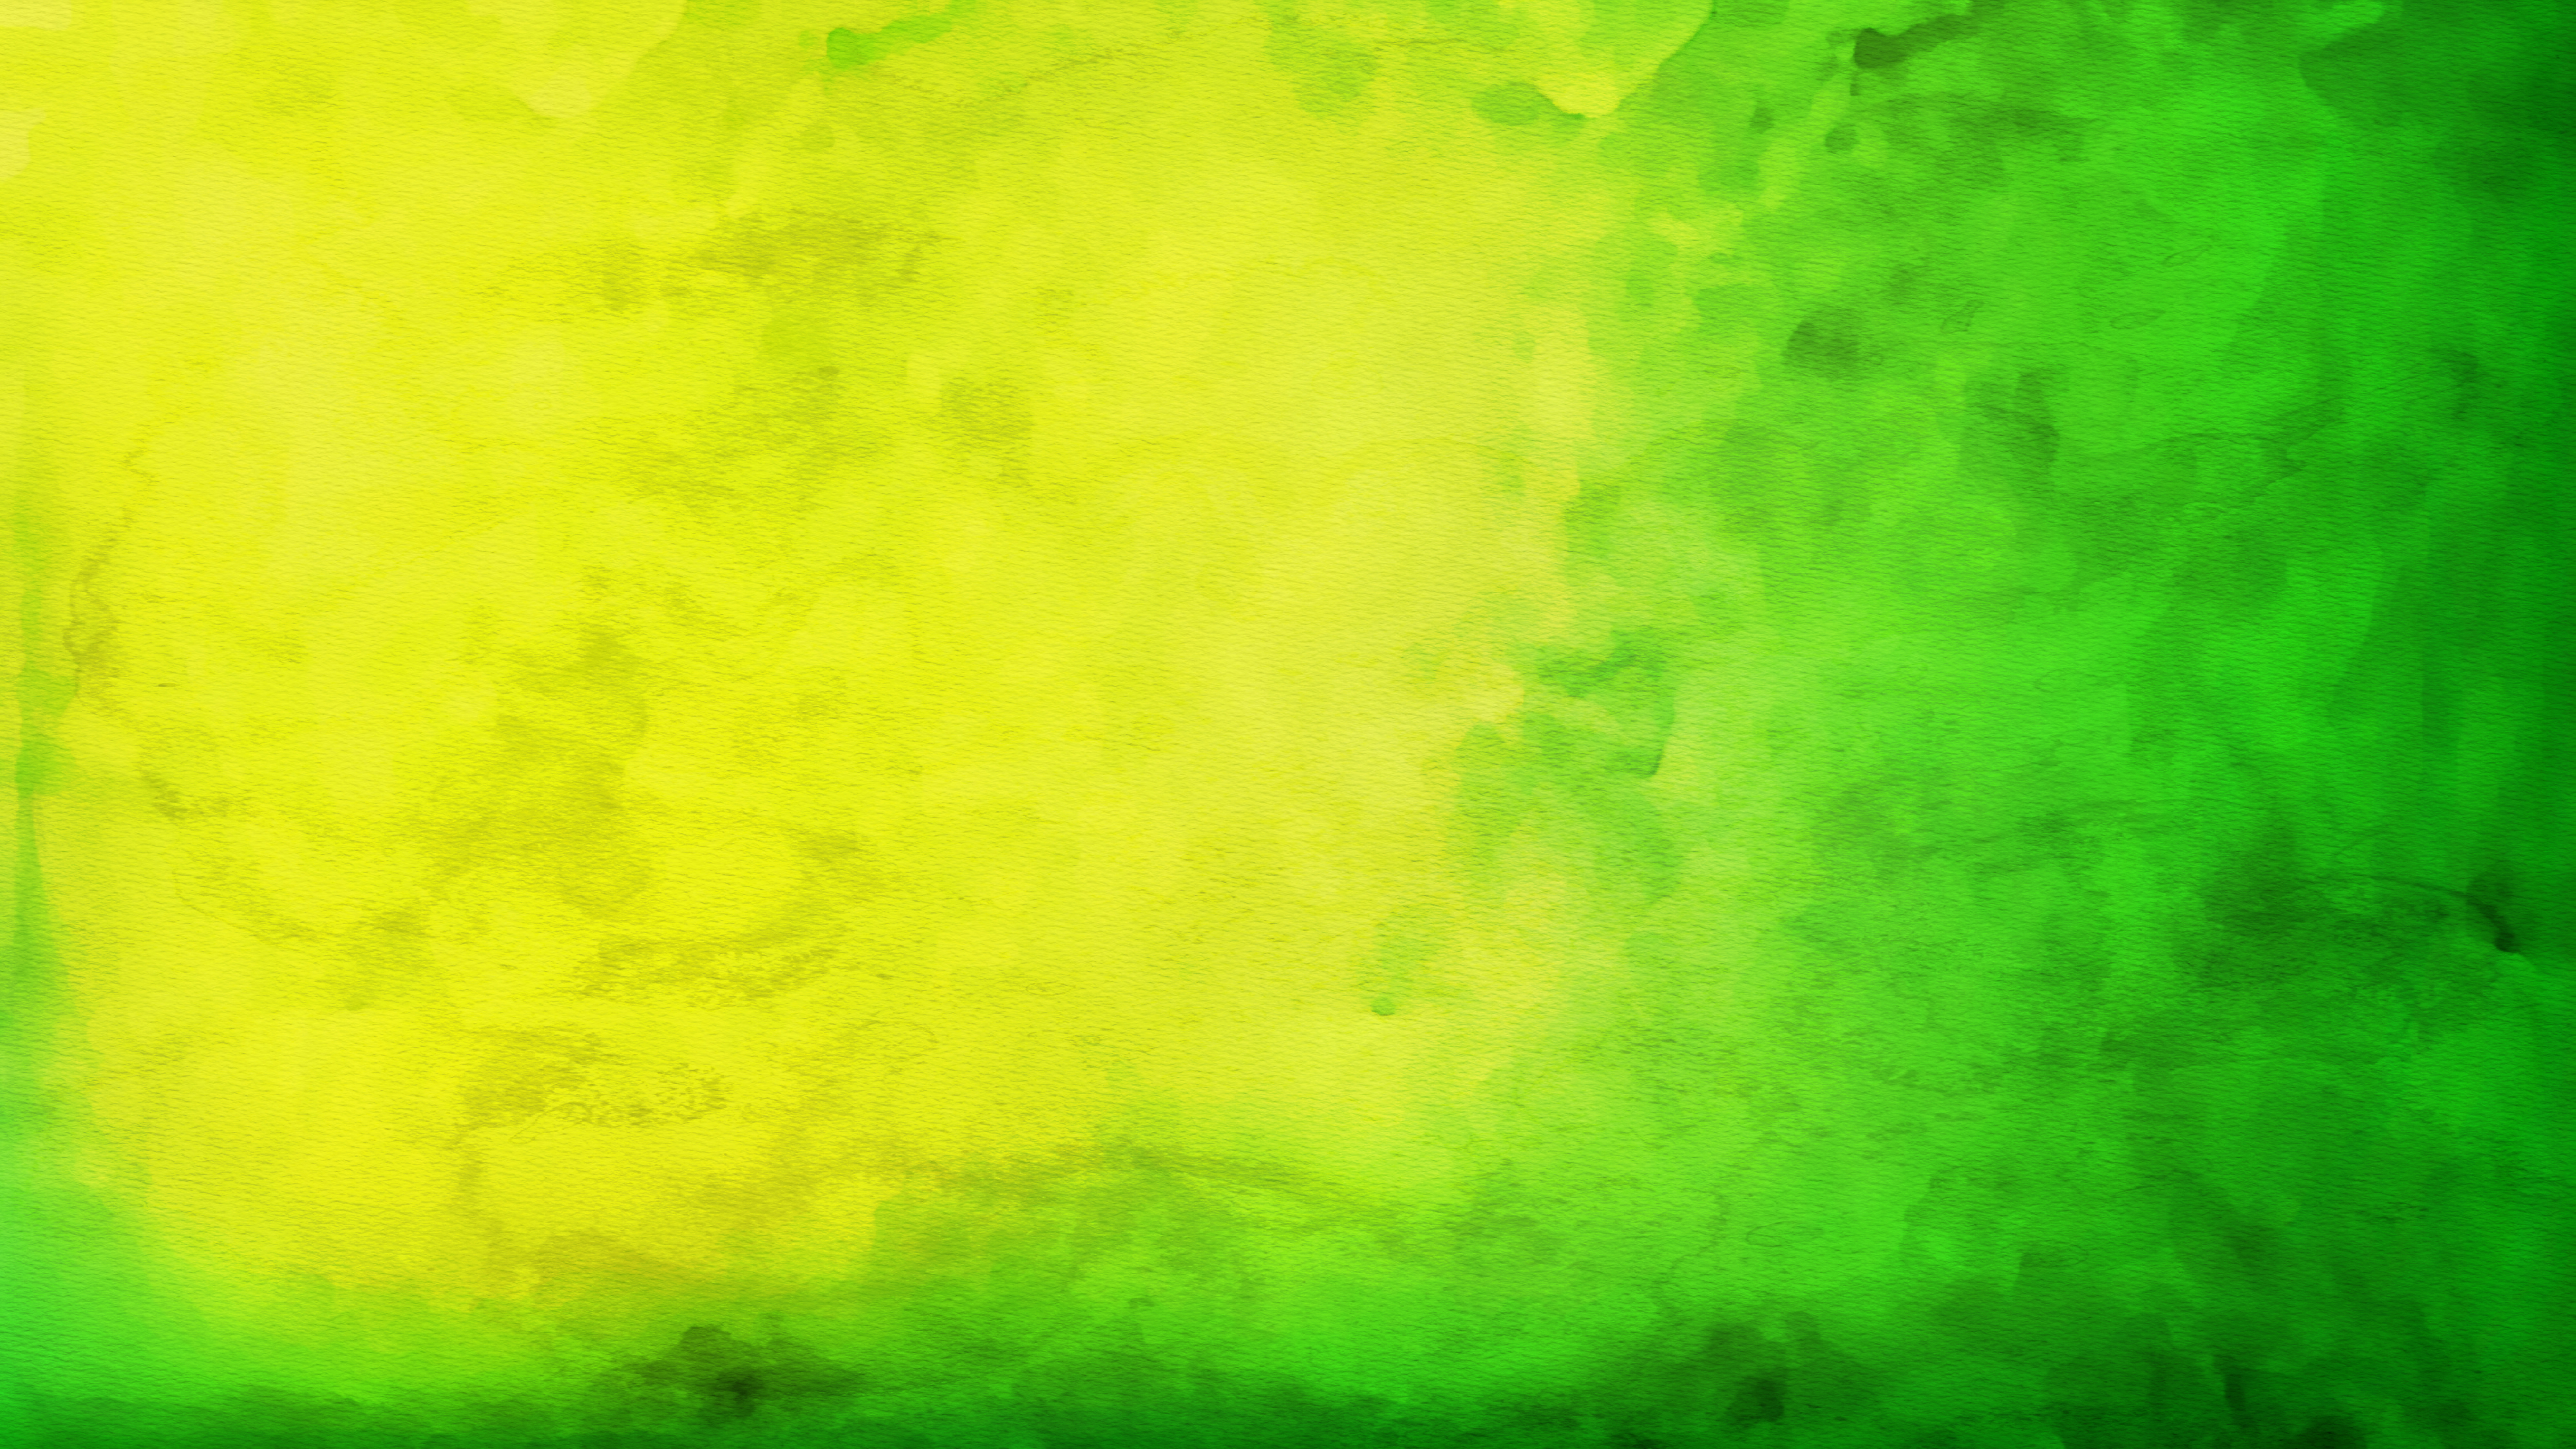 Free Green and Yellow Watercolor Texture Background Image